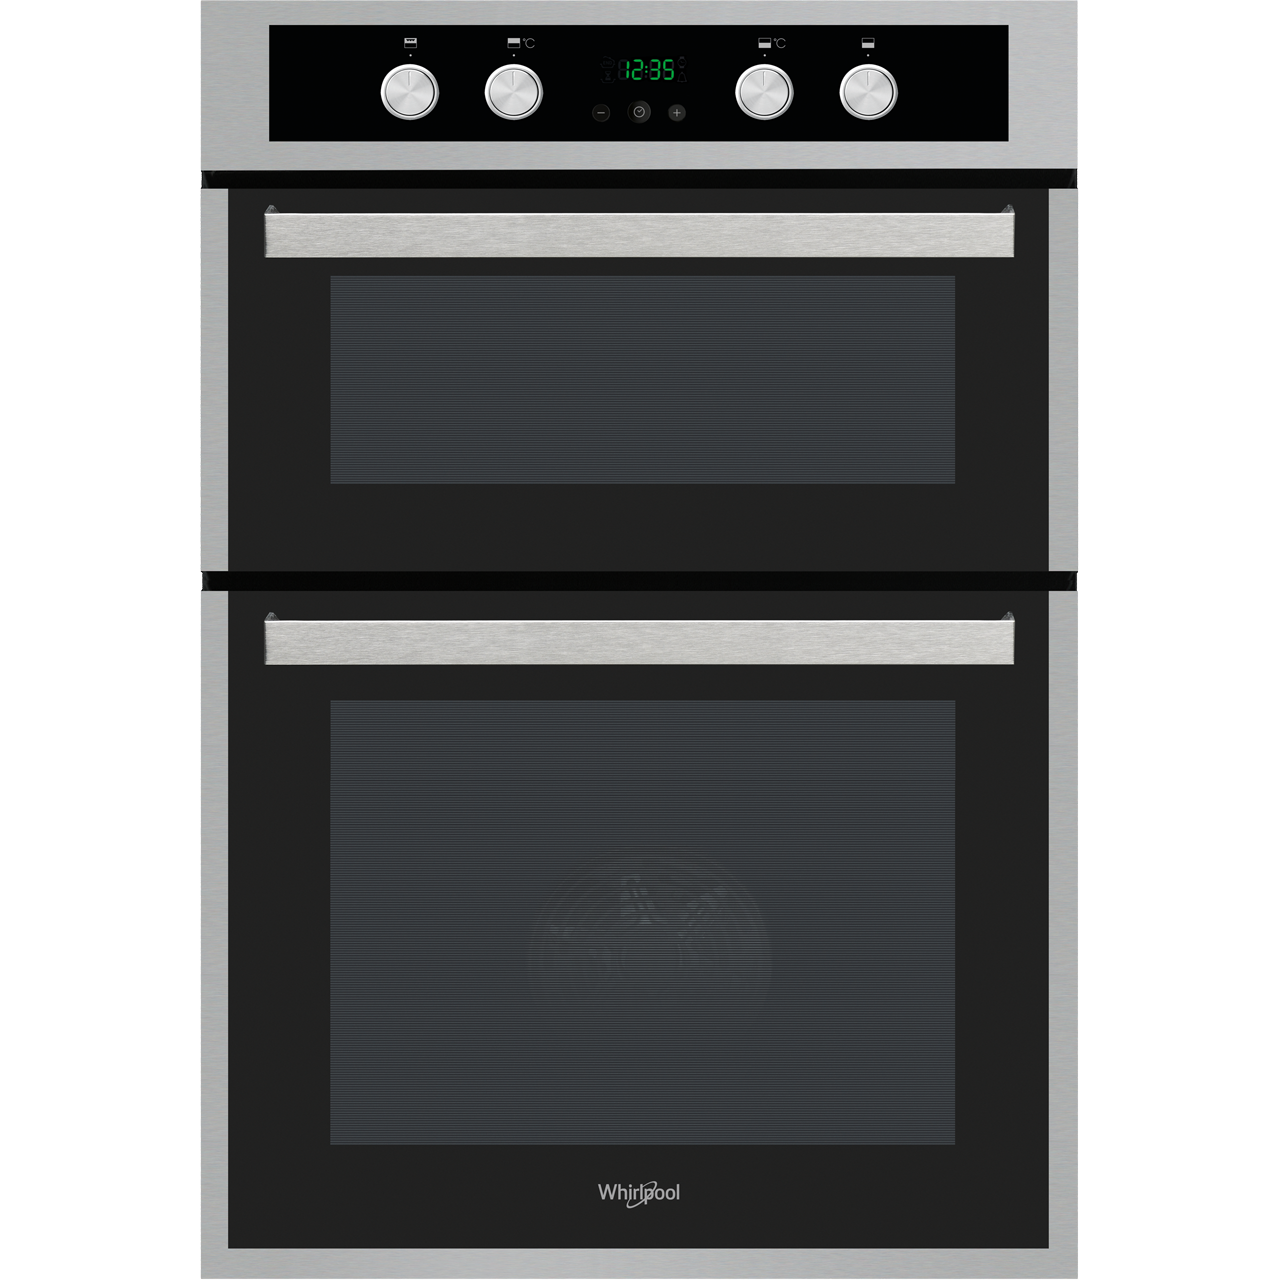 Whirlpool AKL309IX Built In Double Oven Review